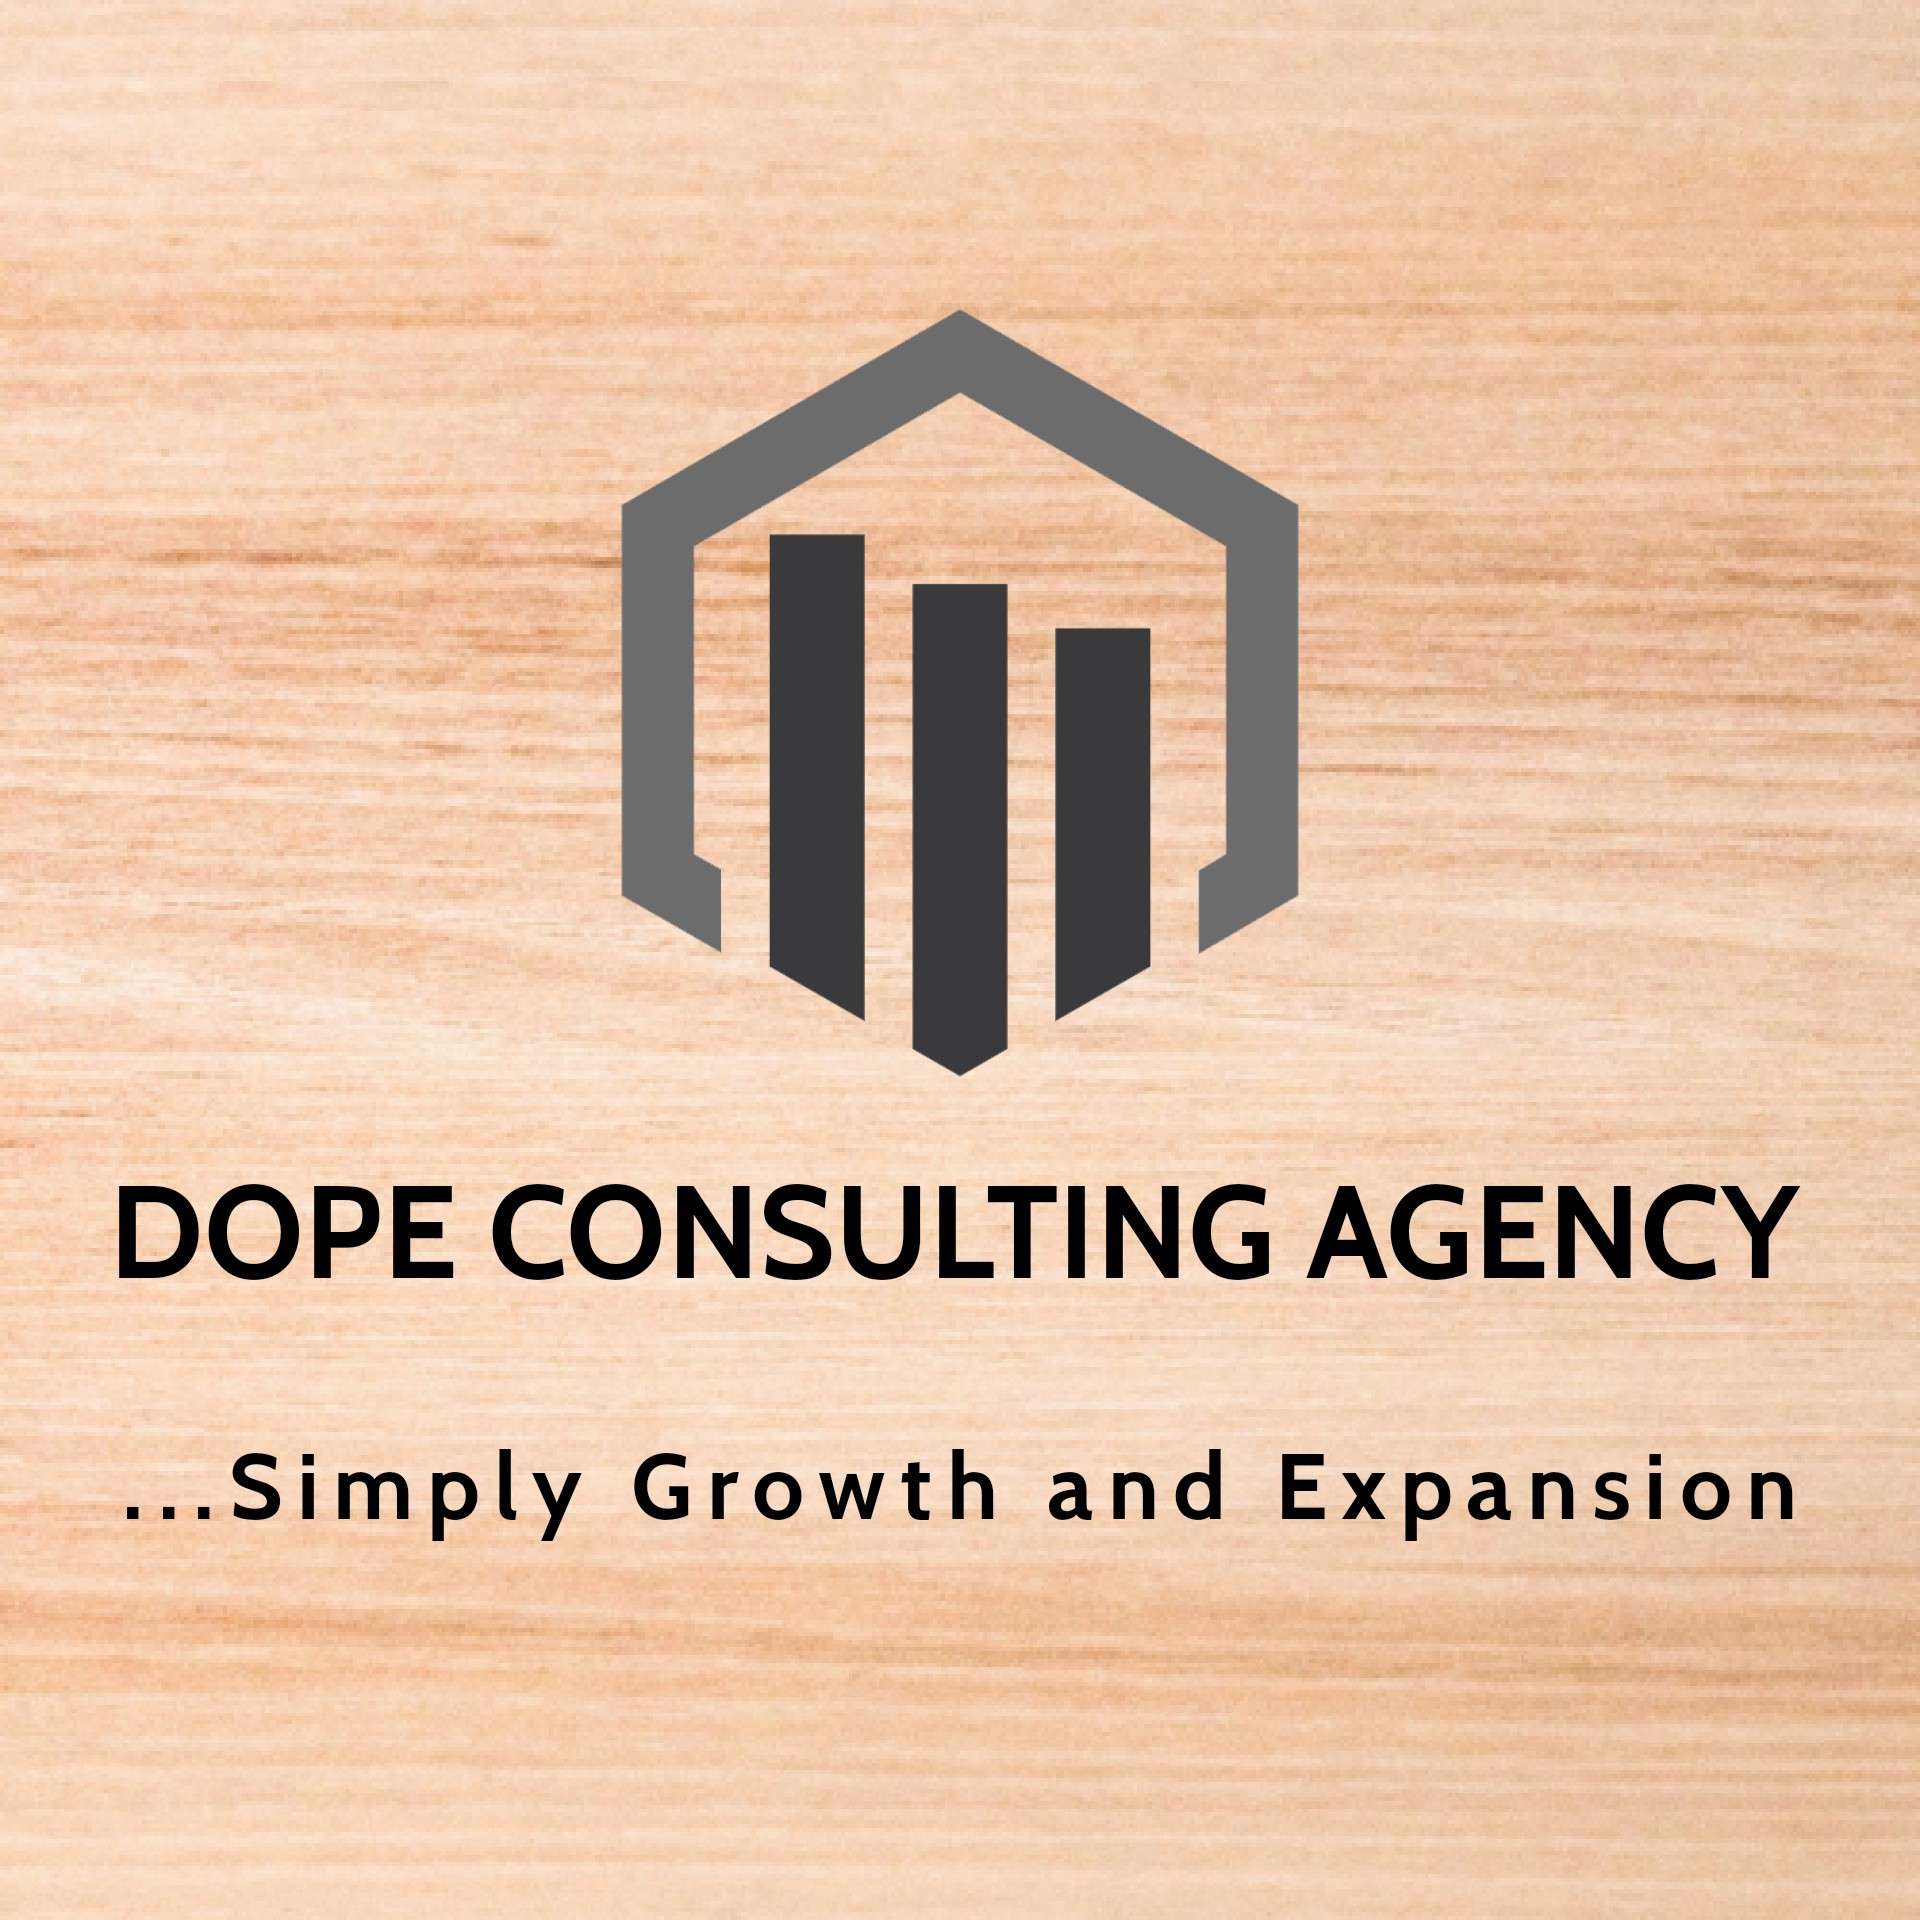 Dope consulting Agency